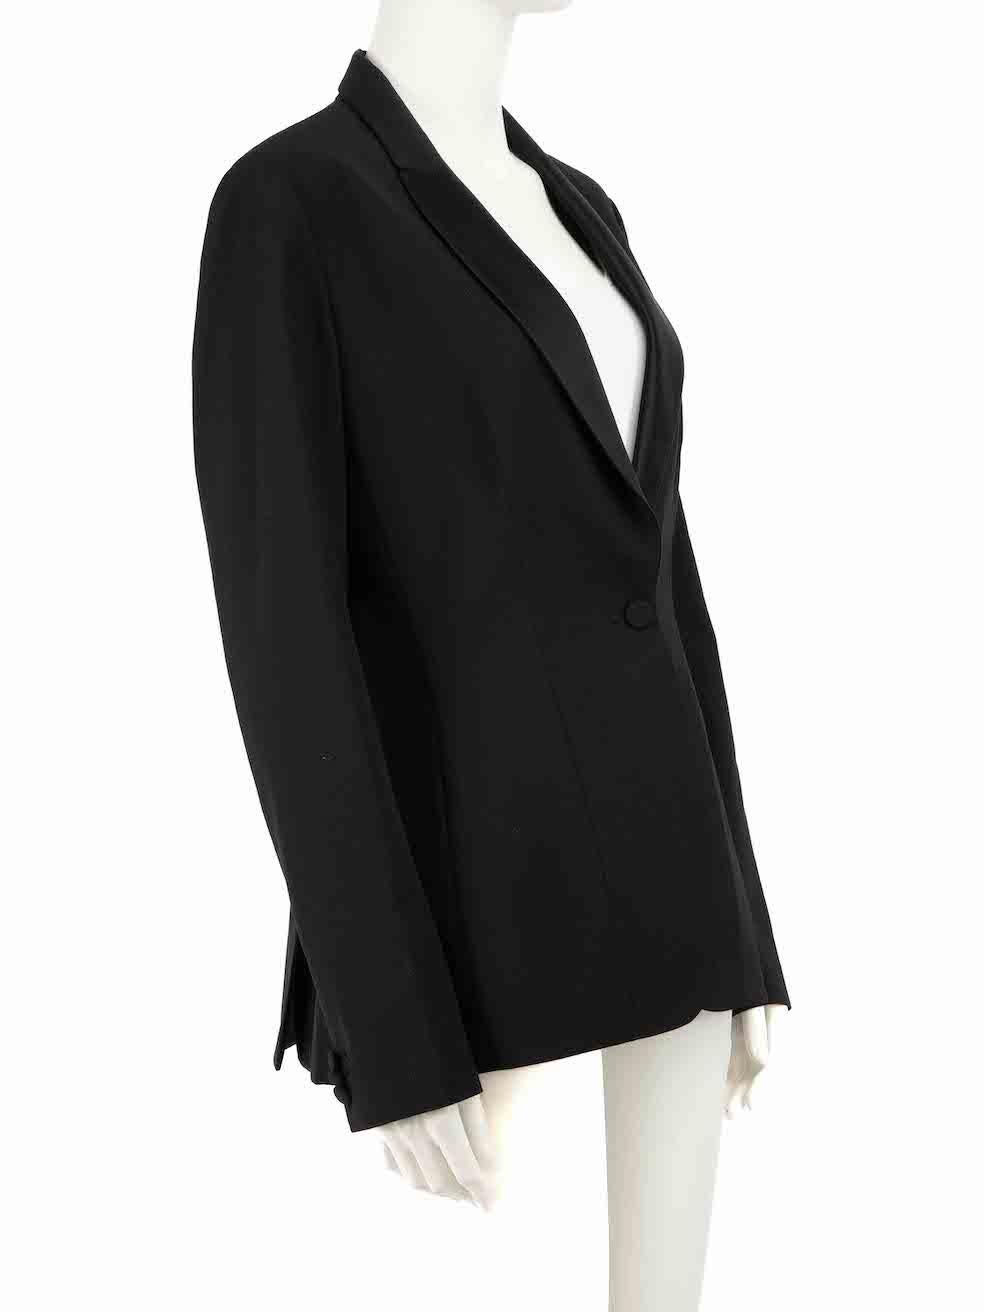 CONDITION is Very good. Minimal wear to blazer is evident. Minimal wear to the left underarm with very light marks to the lining on this used Dior designer resale item.
 
 Details
 Black
 Wool
 Blazer
 Hip length
 Single breasted
 Buttoned cuffs
